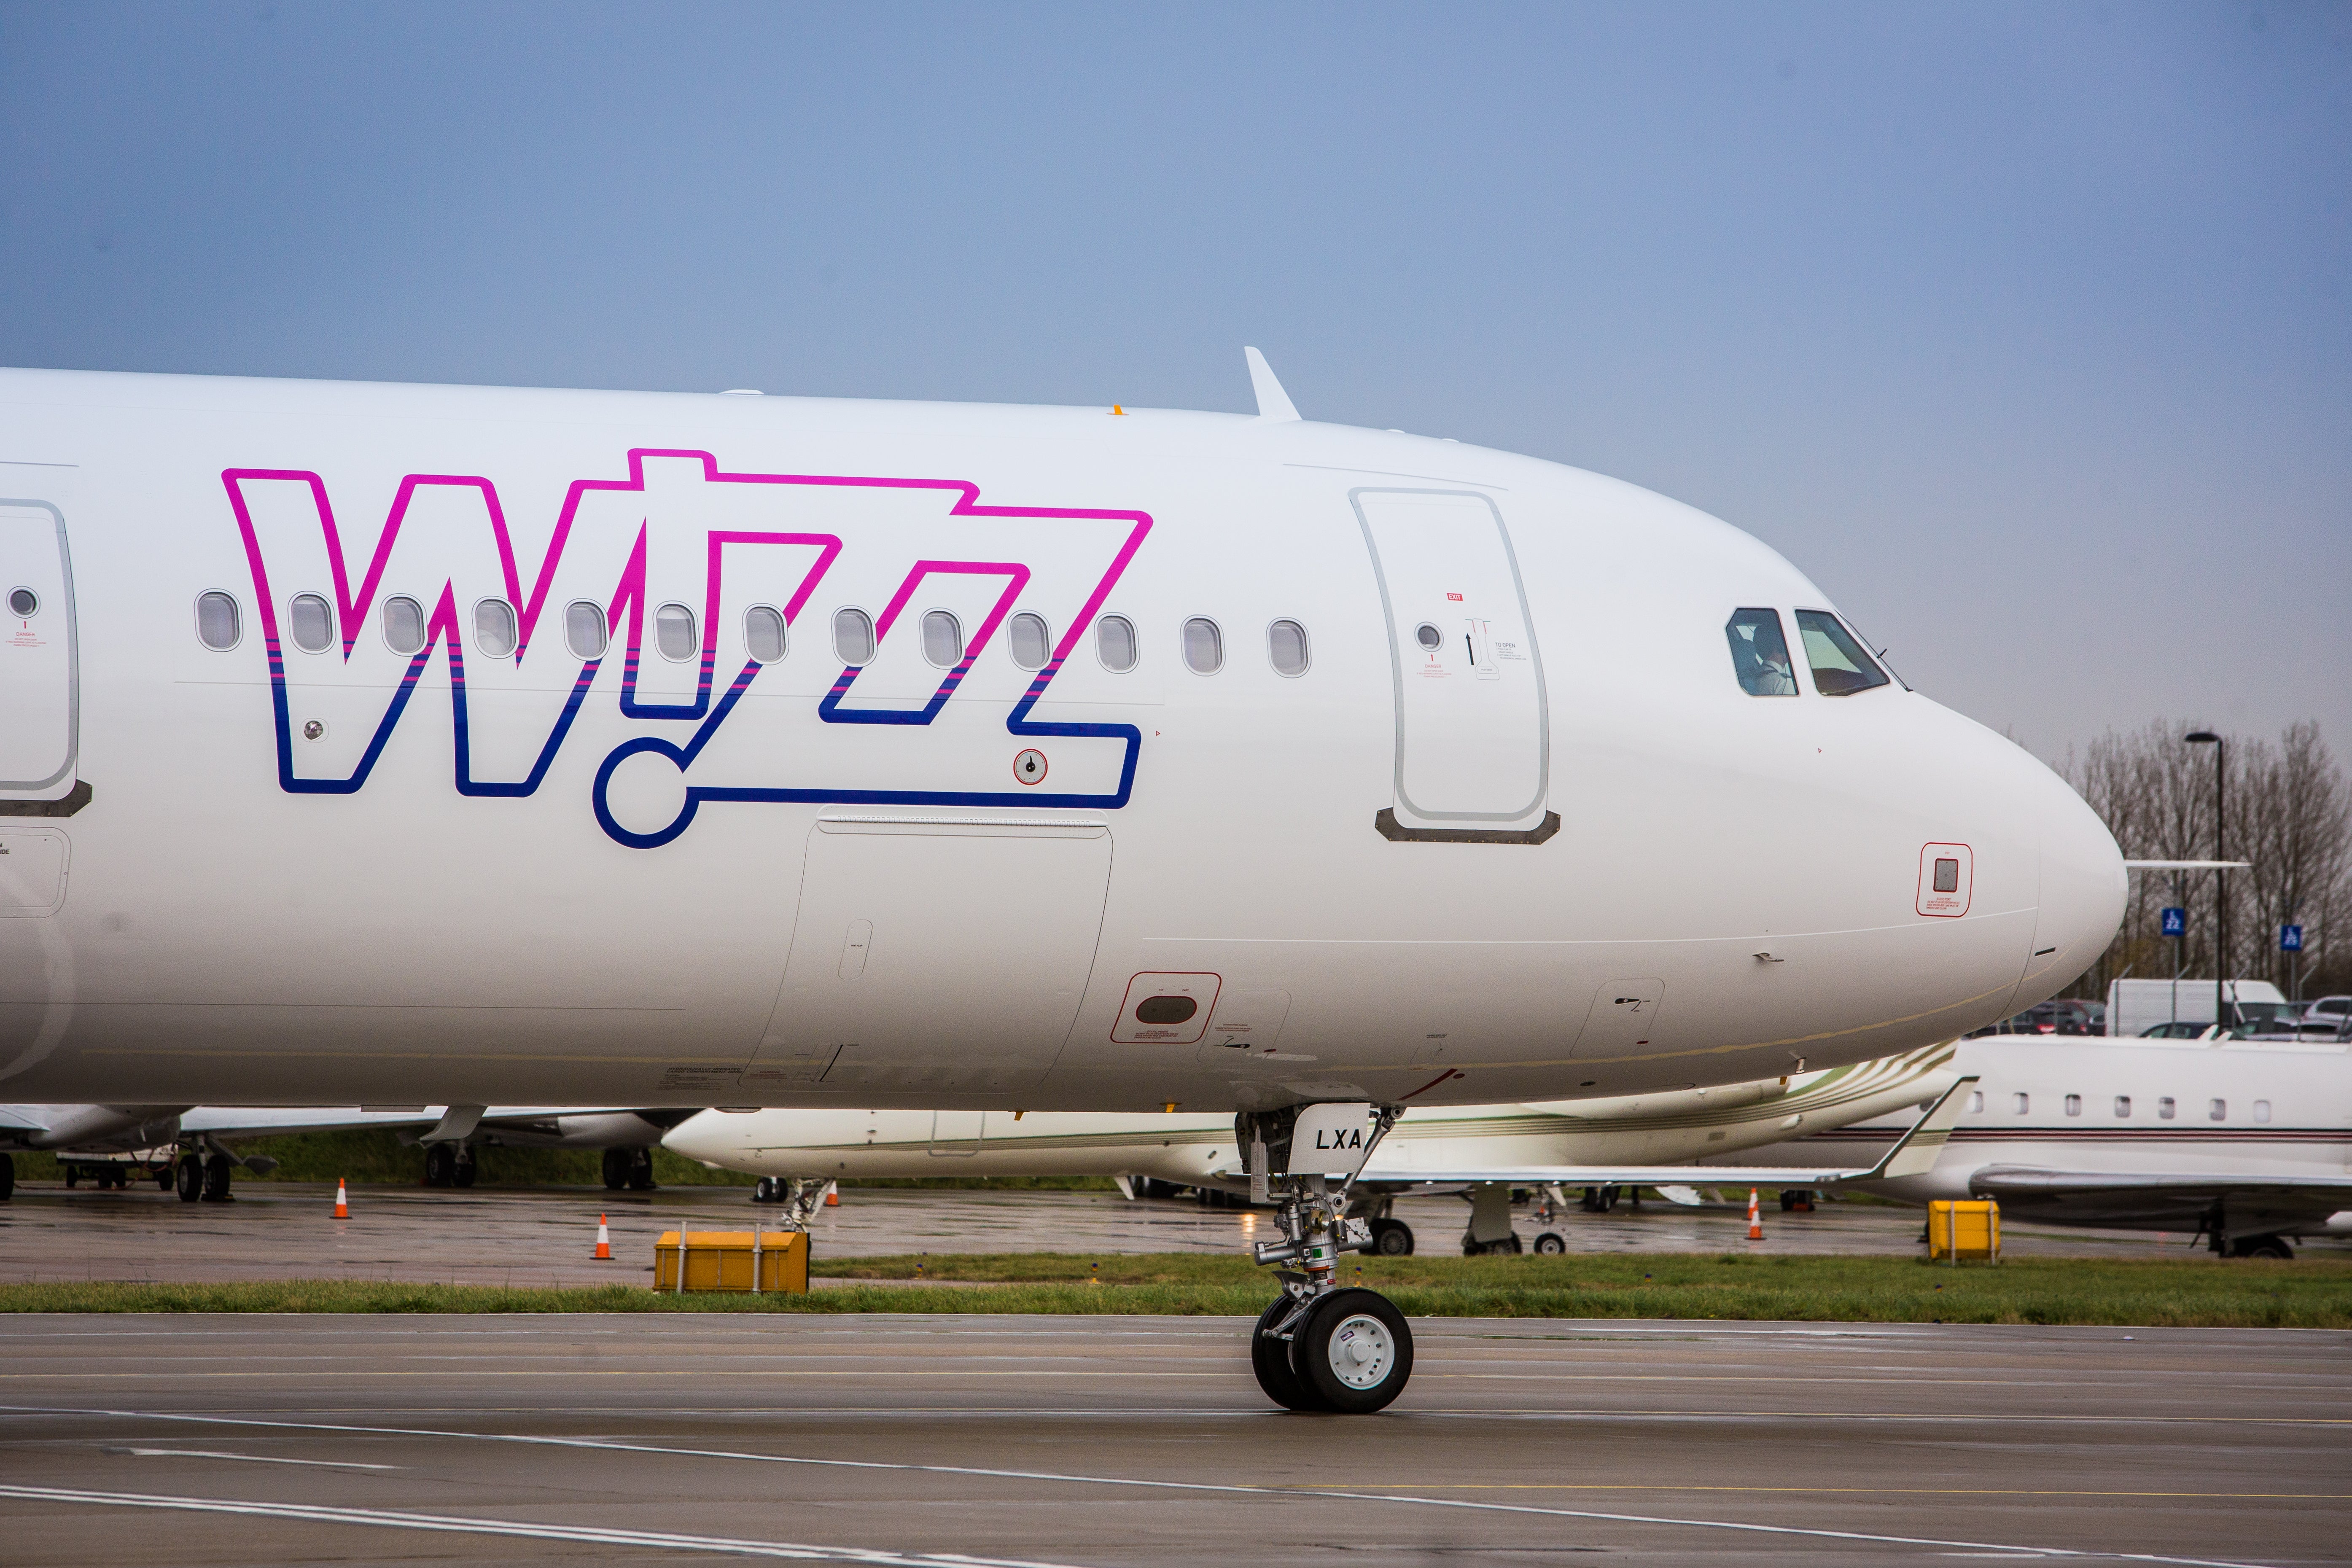 Wizz Air has announced ‘significant growth’ at Gatwick Airport to help get UK aviation ‘back on its feet’ (Wizz Air/PA)